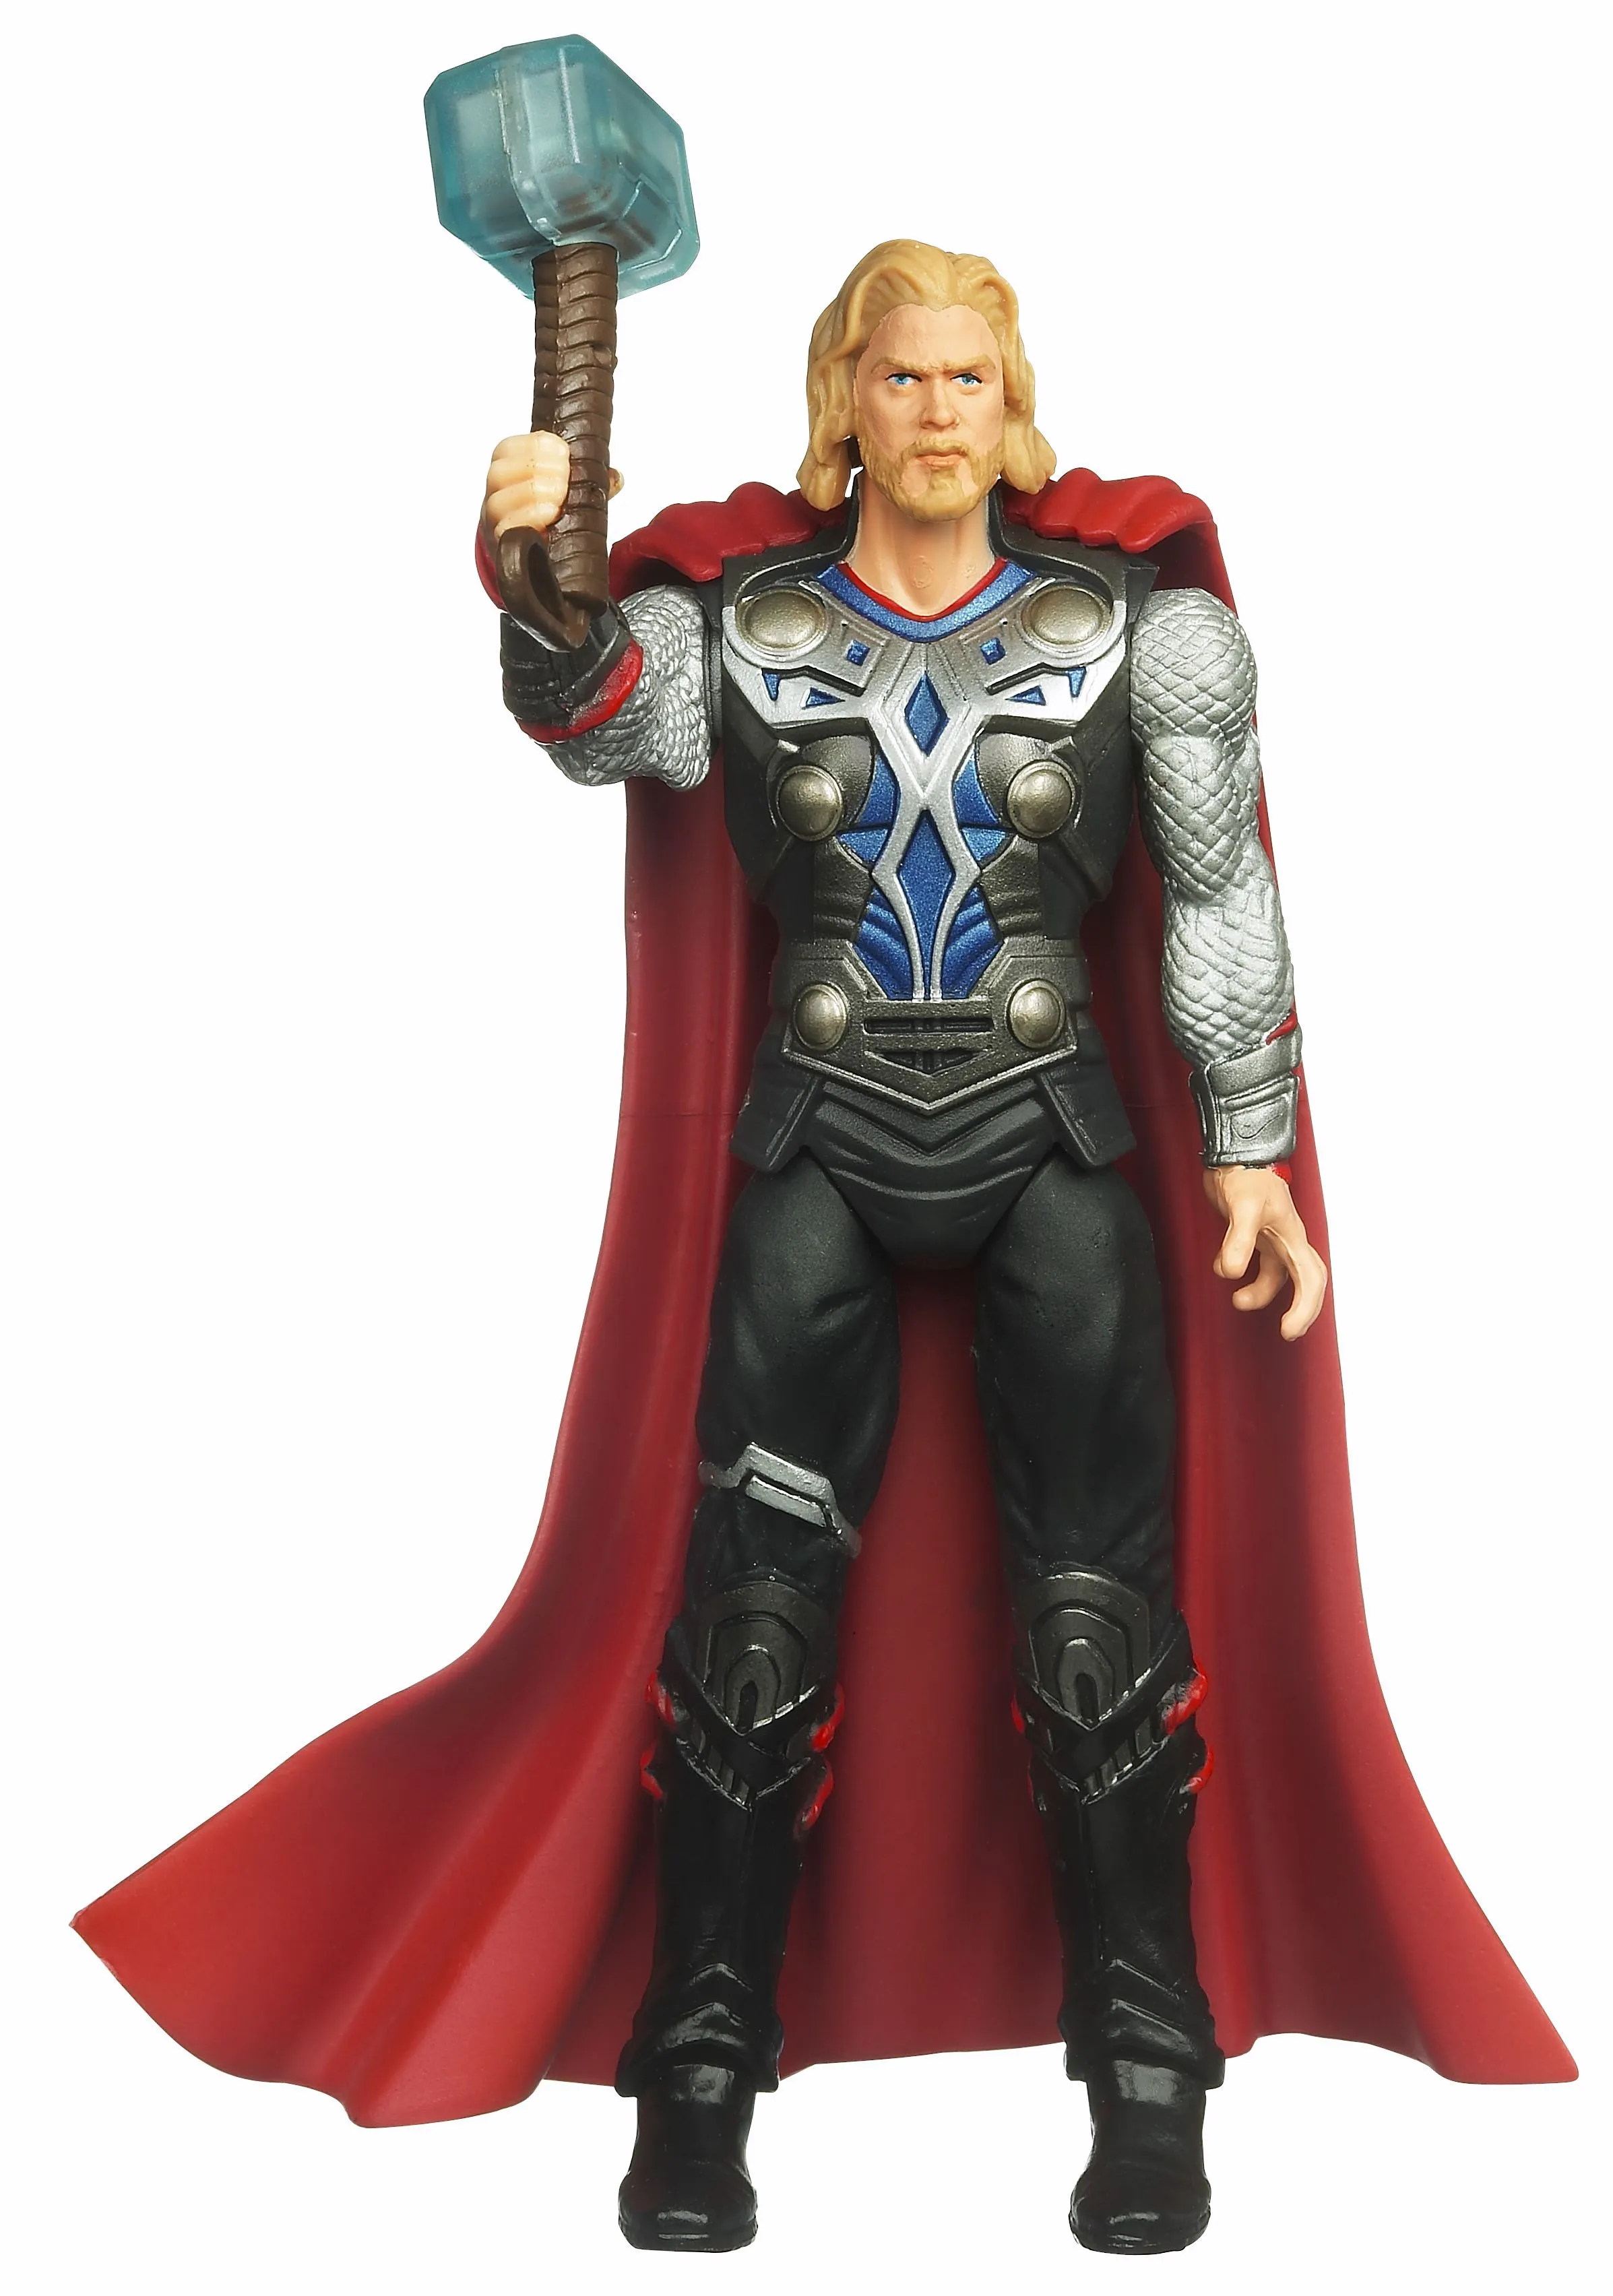  ... be released in conjunction with Marvel ‘s upcoming movie, Thor